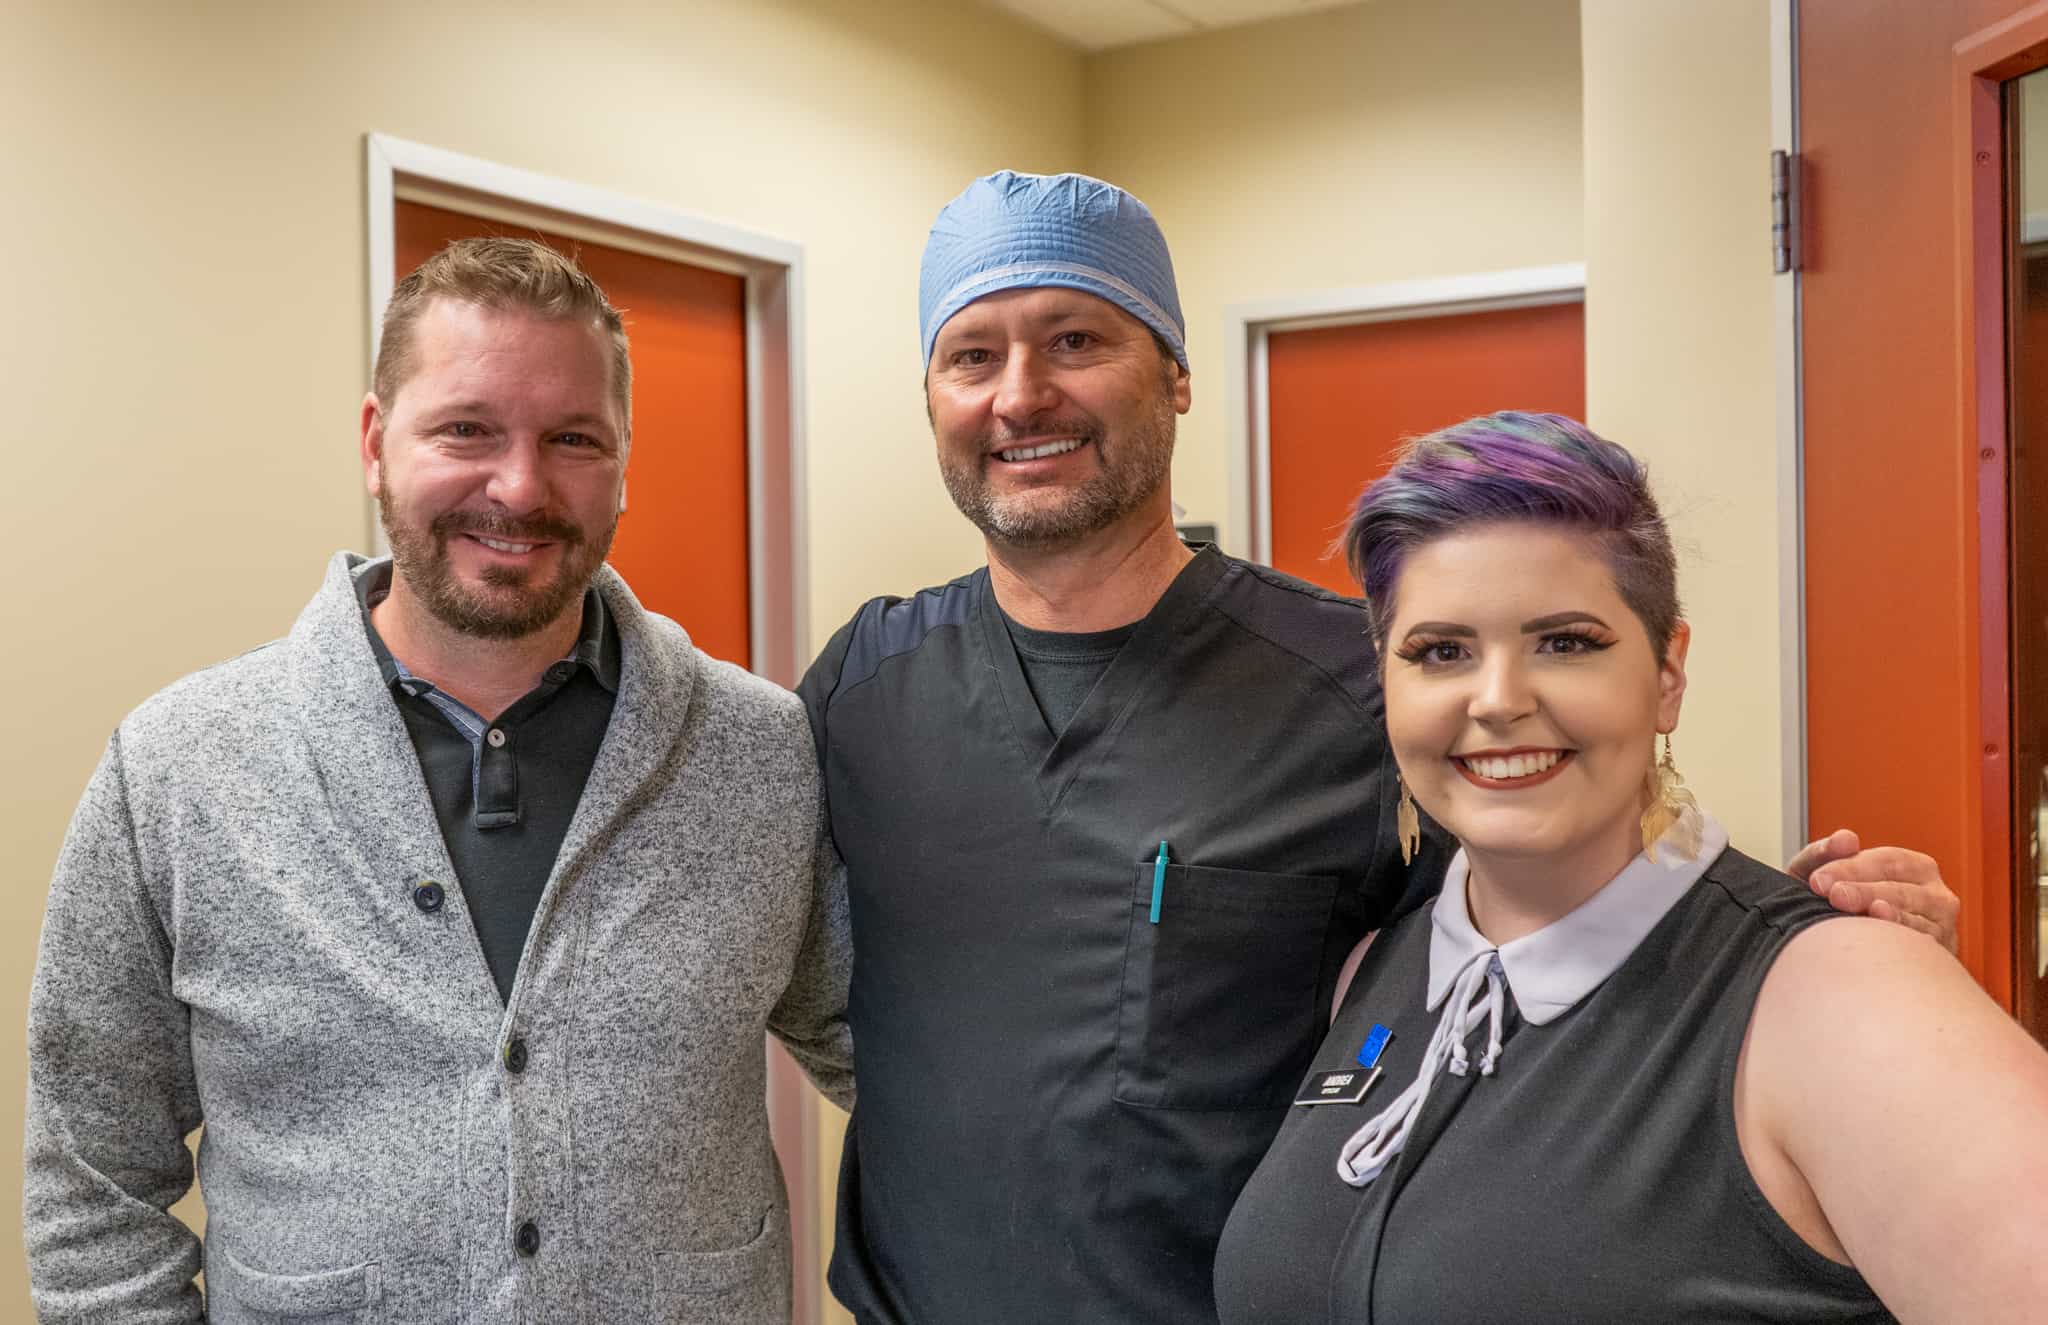 Standard Optical LASIK Surgeon Dr. Spencer Celebrates One-Year Anniversary in West Valley Salt Lake City